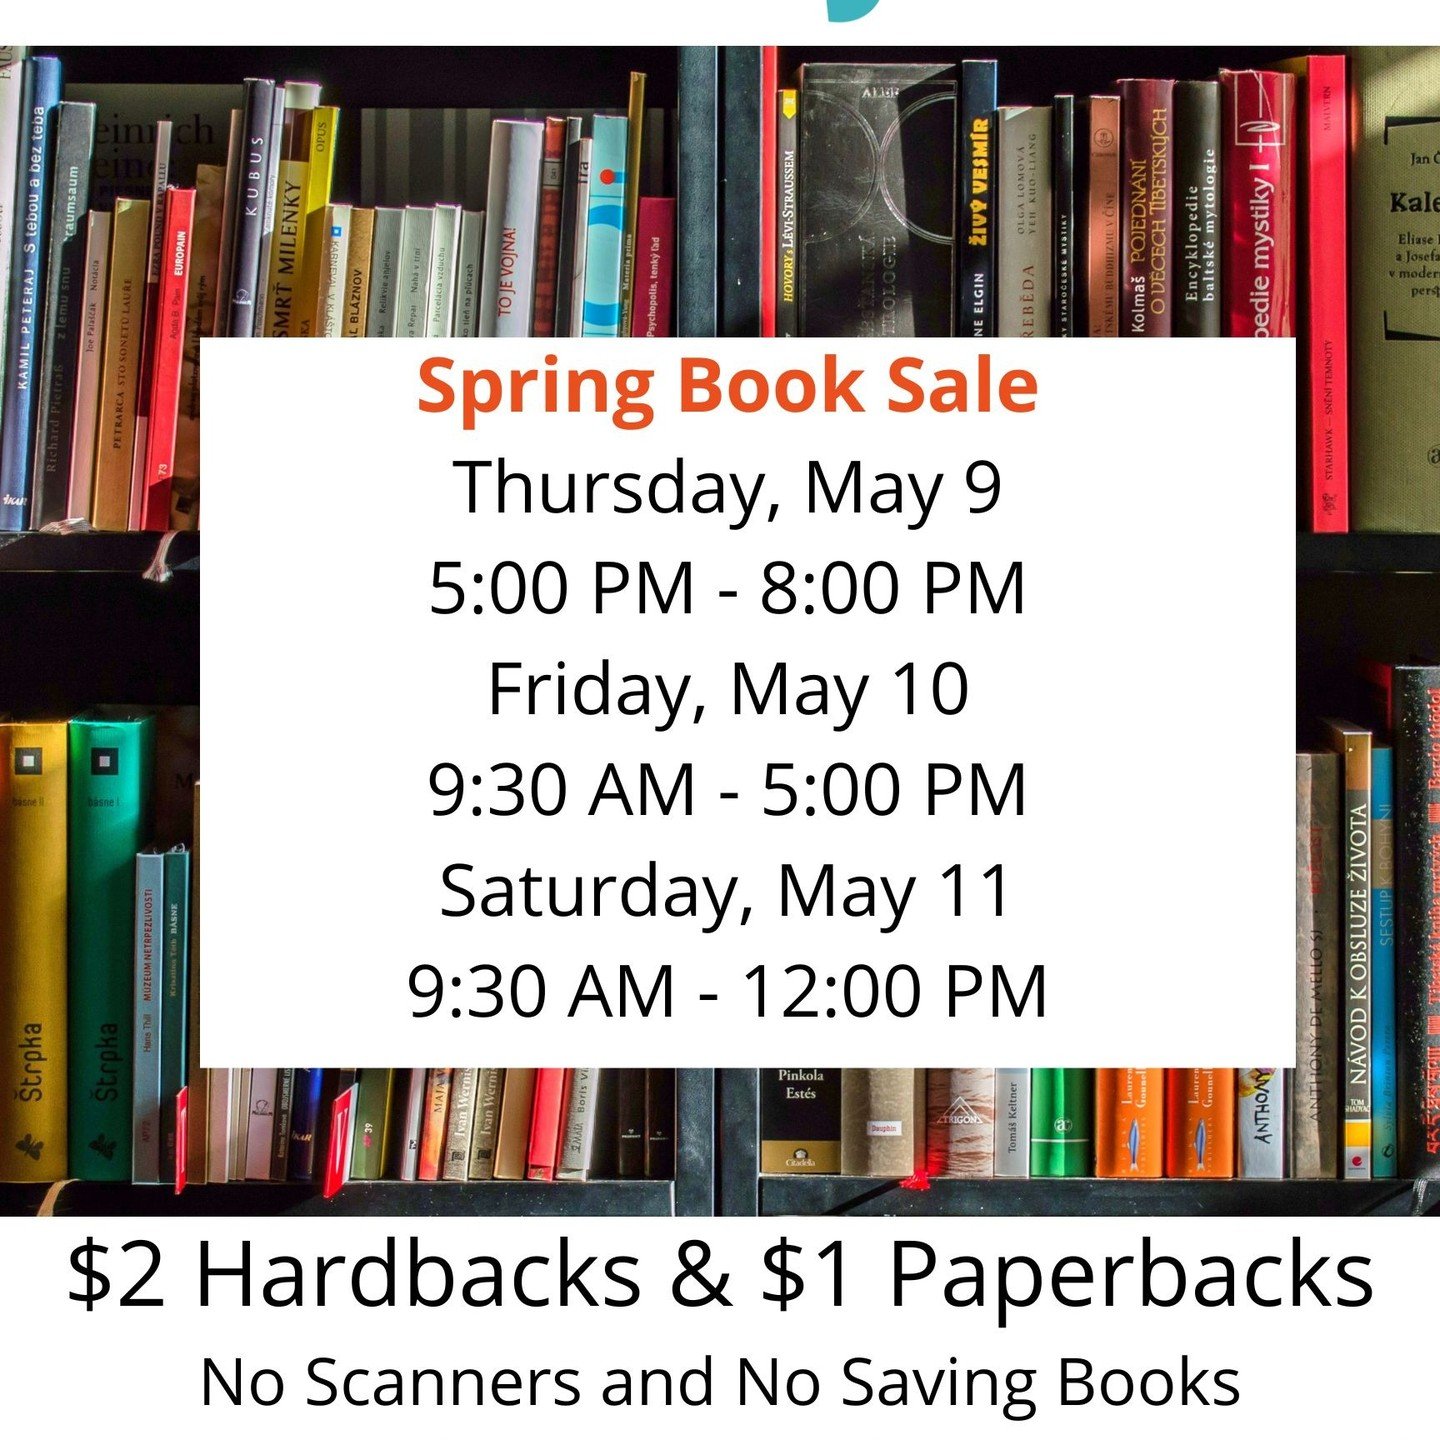 Just in time for summer, find your next reads at our largest sale of the year! 
Hours:
Thursday, May 9
5:00 PM - 8:00 PM

Friday, May 10
9:30 AM - 5:00 PM

Saturday, May 11
9:30 AM - 12:00 PM

$2 Hardbacks &amp; $1 Paperbacks

No Scanners and No Savi